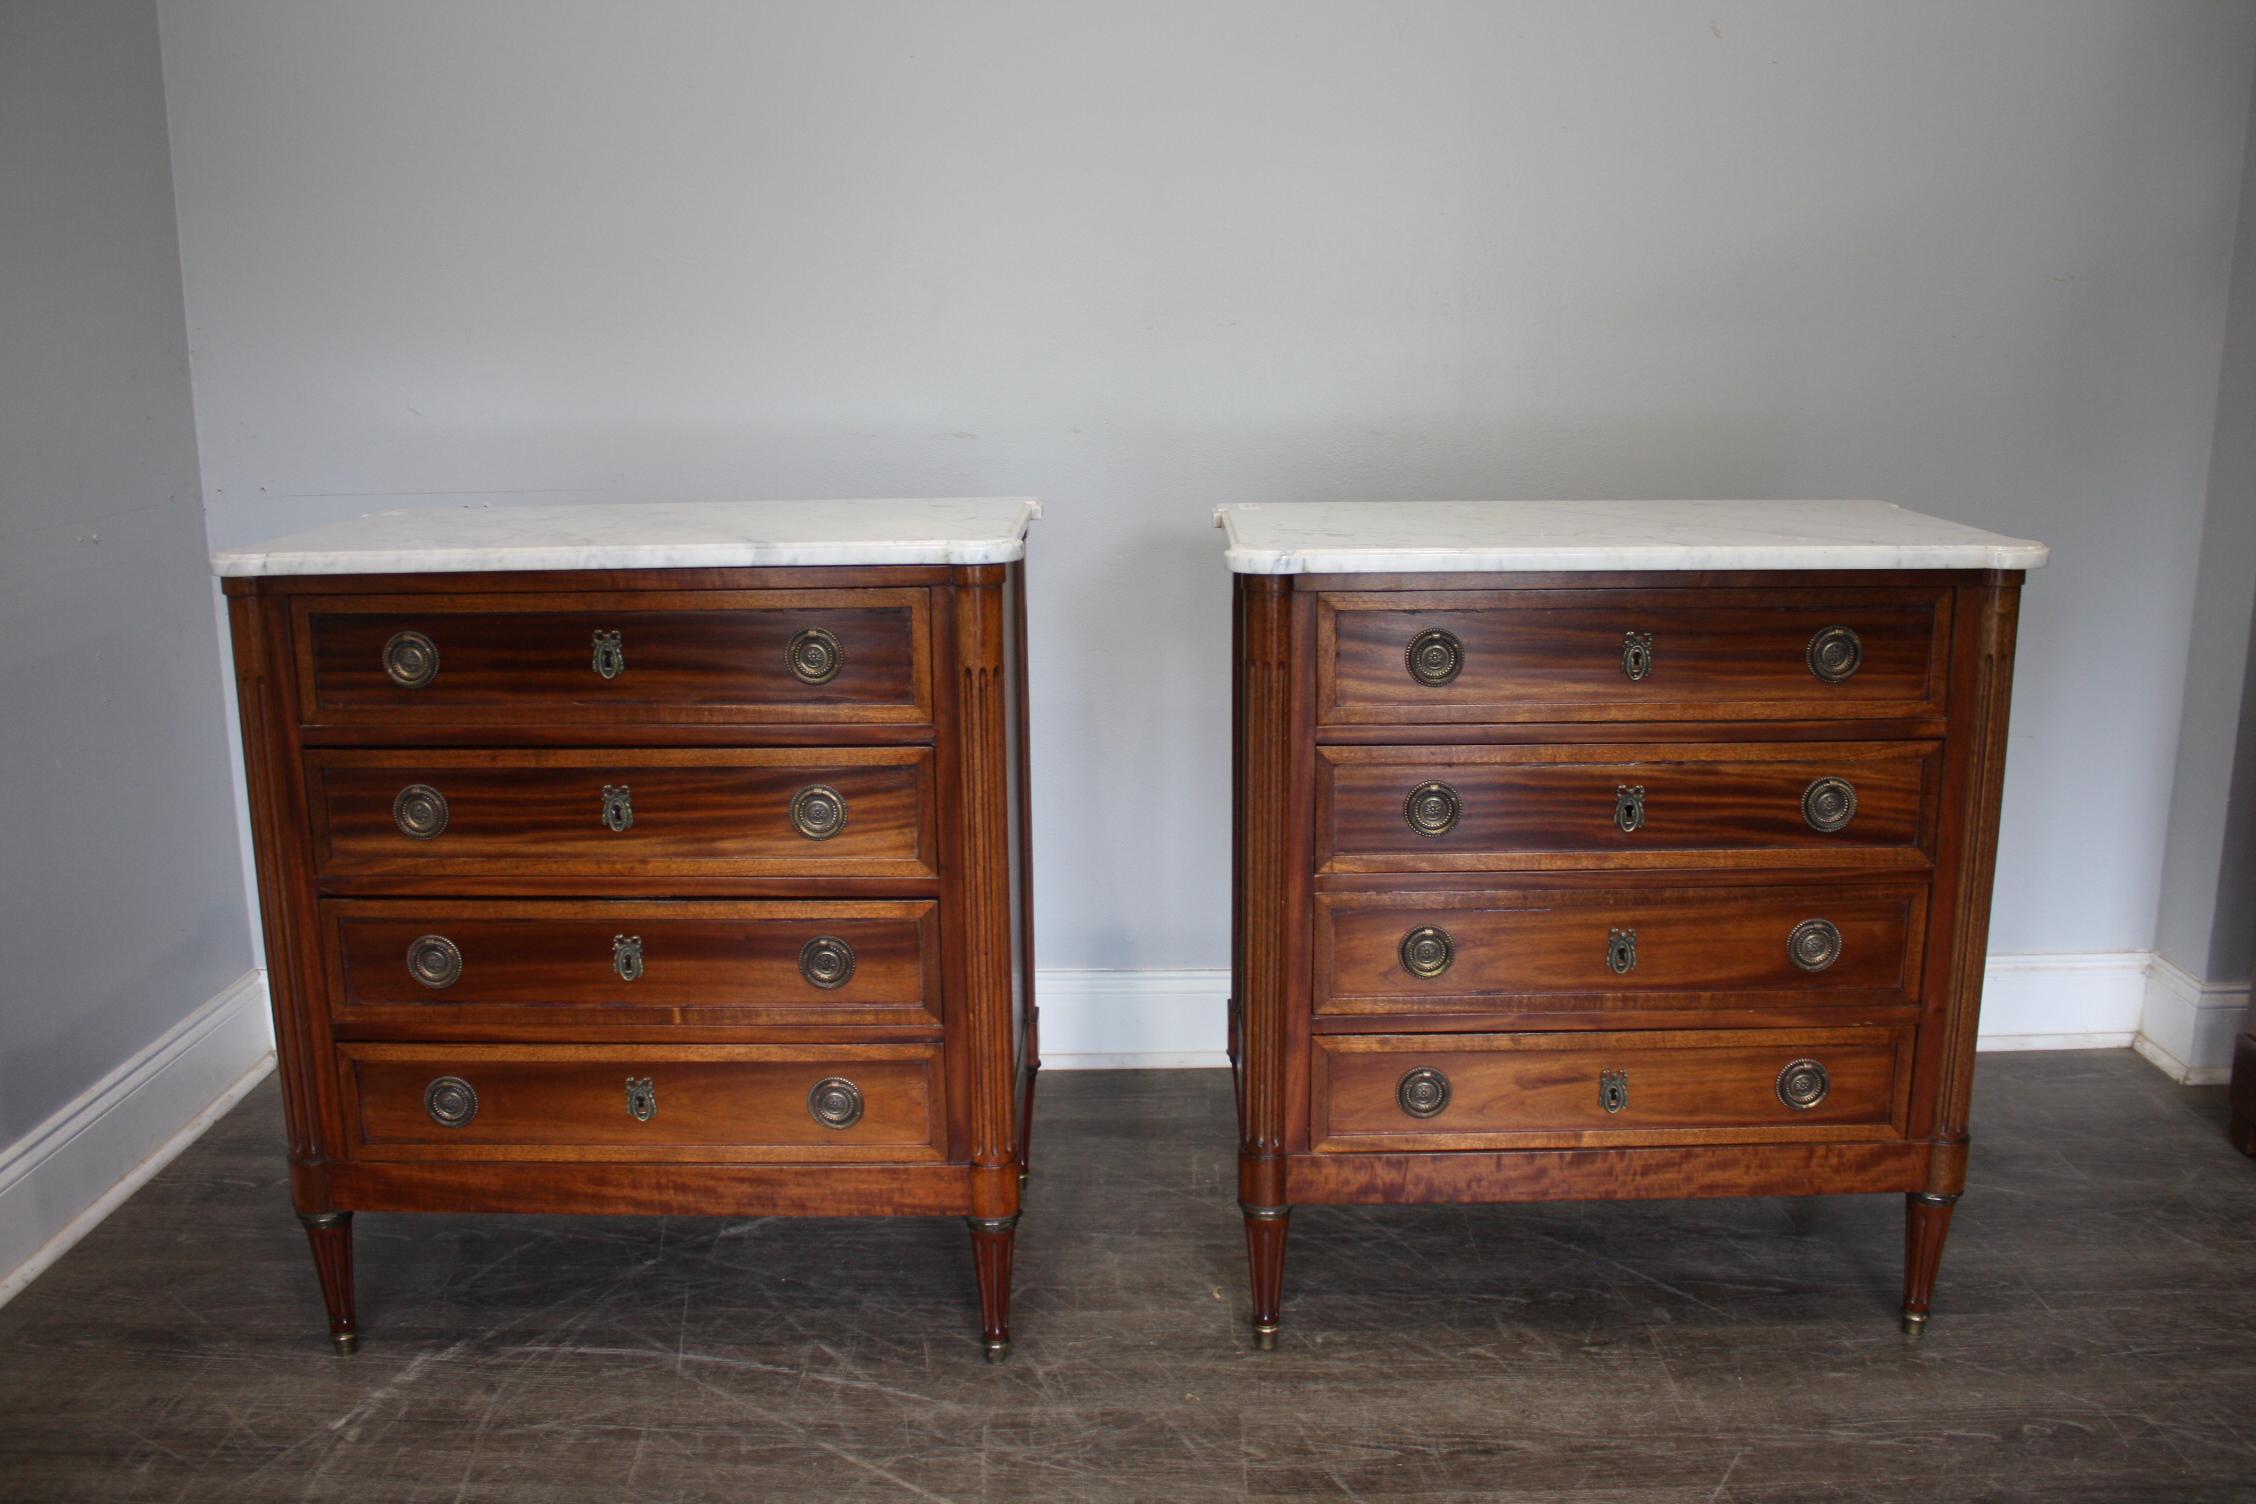 Wonderful Pair of late 19th century Commode, very hard to found pair. They are in flamed mahogany wood with a white with grey veins marble top.